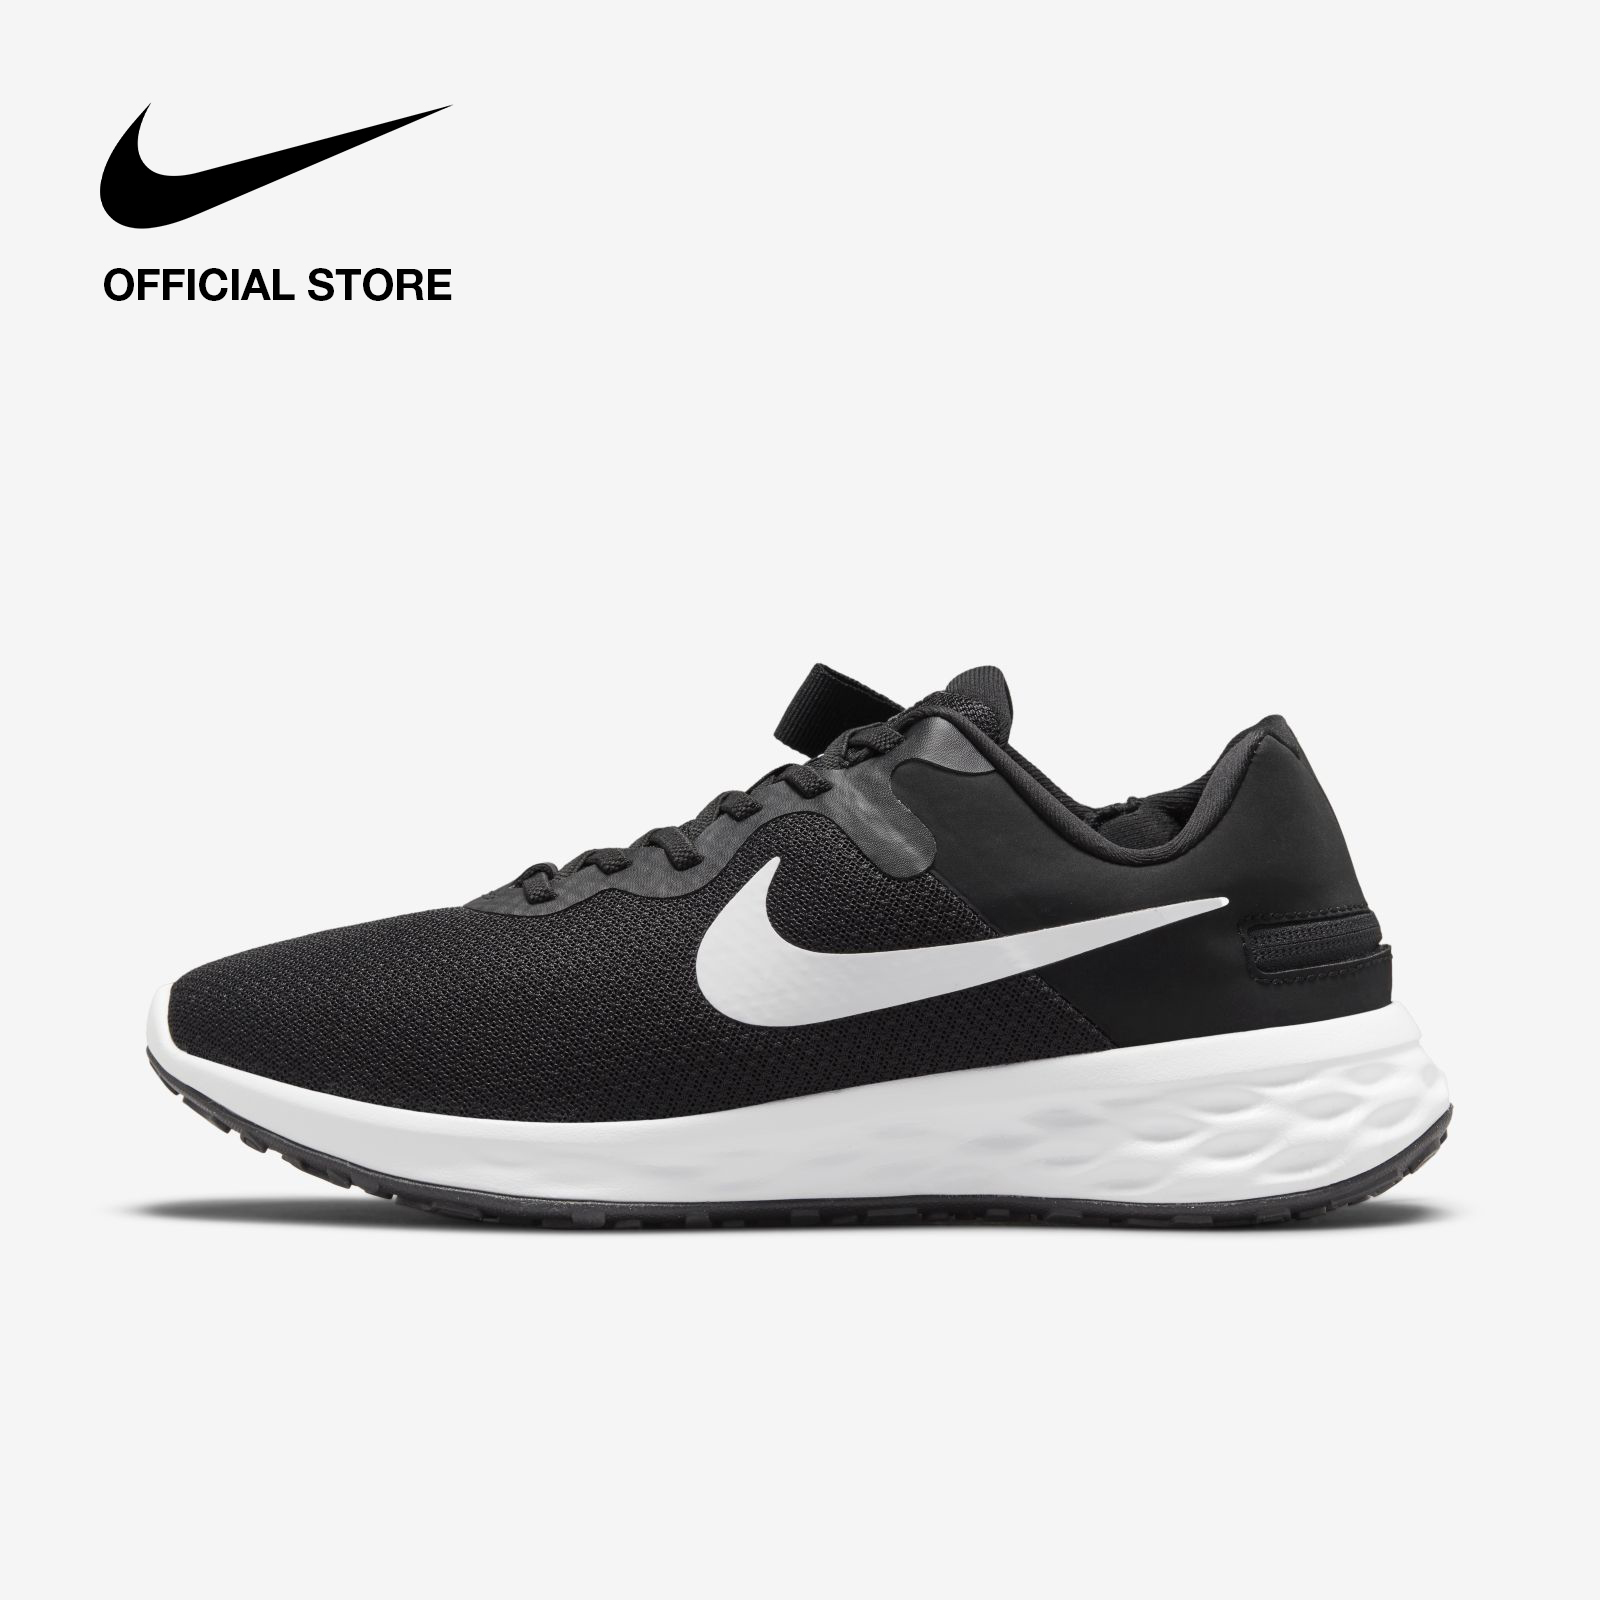 Discover more than 147 nike flagship shoes best